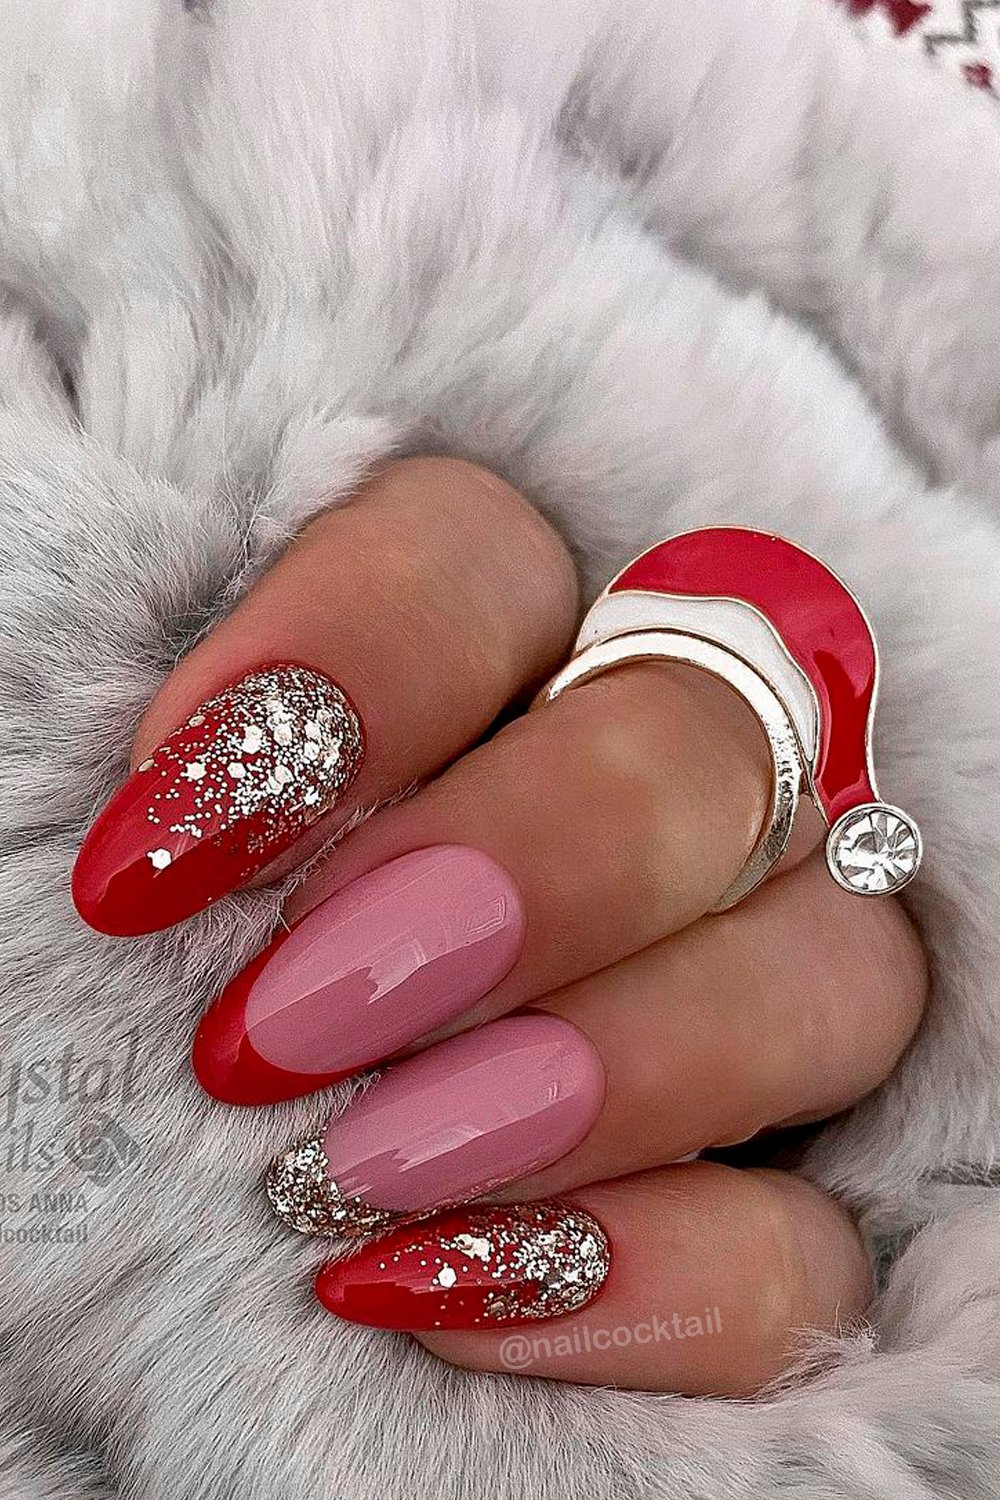 Twitter 上的 Cute Manicure："Santa Claus Red Christmas Nails with Glitter 🎅🎄 for more✓: https://t.co/RYU1cpAzZm @ManicureCute #nail #nails #nailart #winternails #trendynails #winter2021 #christmas2021 #christmasnailsart ...